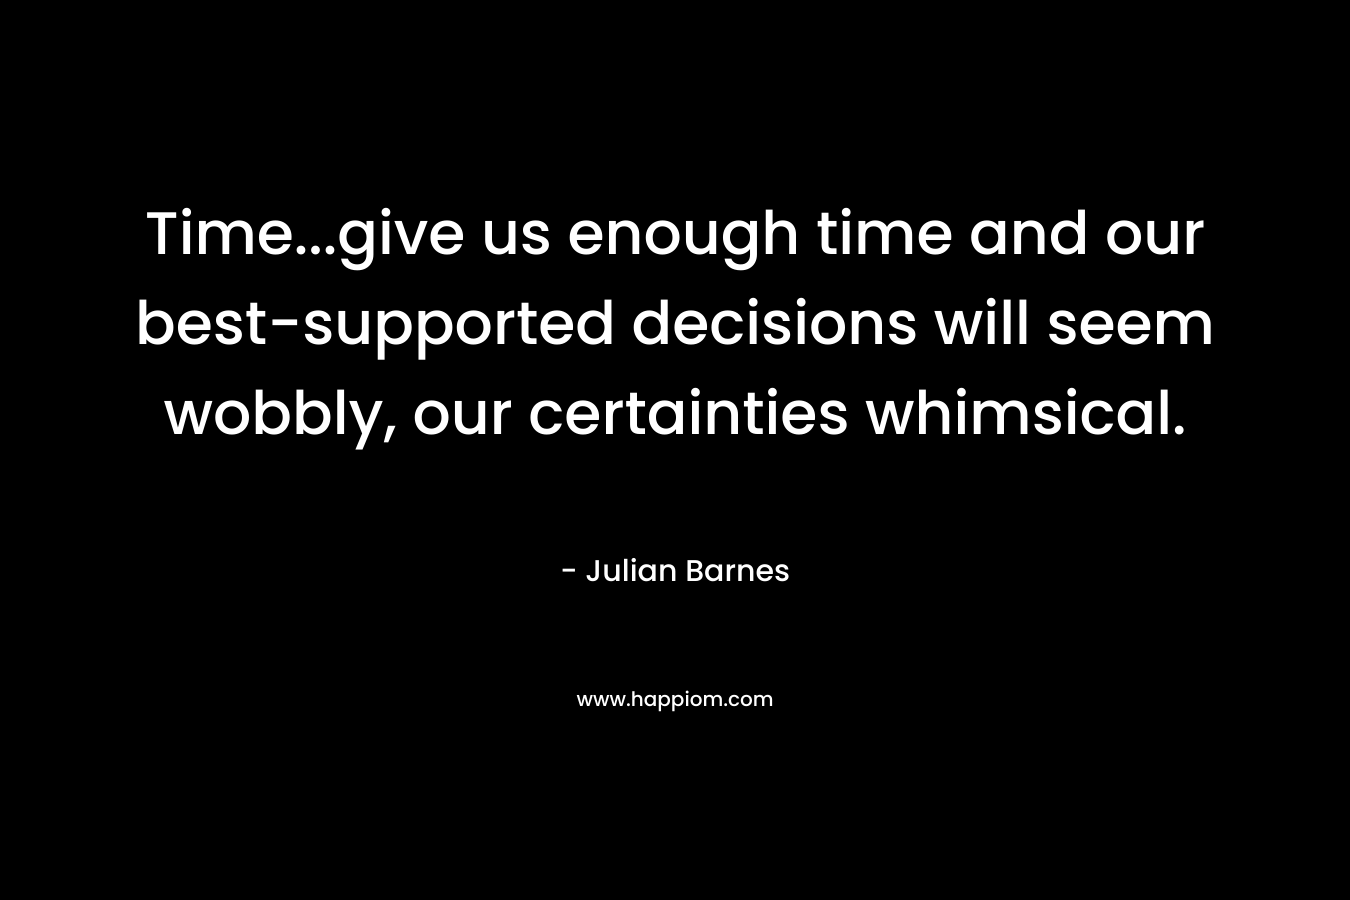 Time…give us enough time and our best-supported decisions will seem wobbly, our certainties whimsical. – Julian Barnes